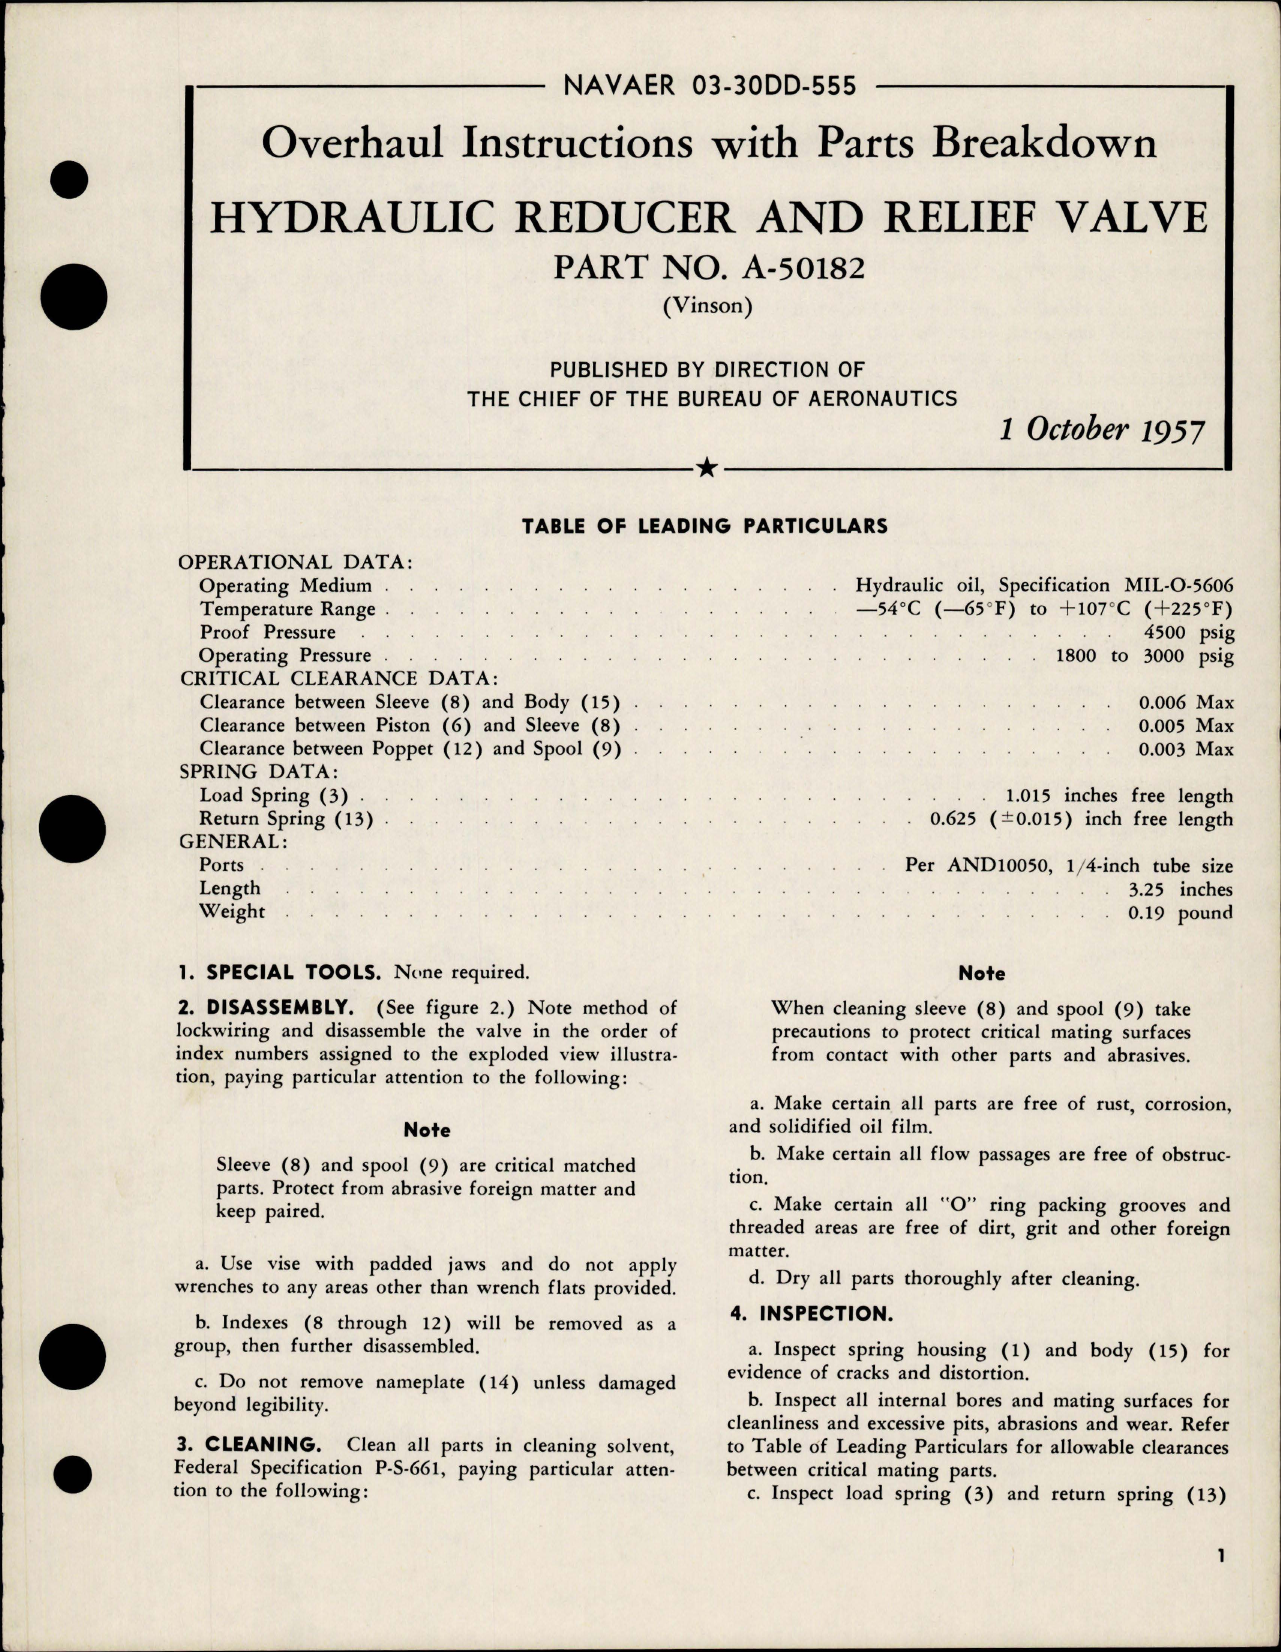 Sample page 1 from AirCorps Library document: Overhaul Instructions with Parts breakdown for Hydraulic Reducer and Relief Valve Part A-50182 